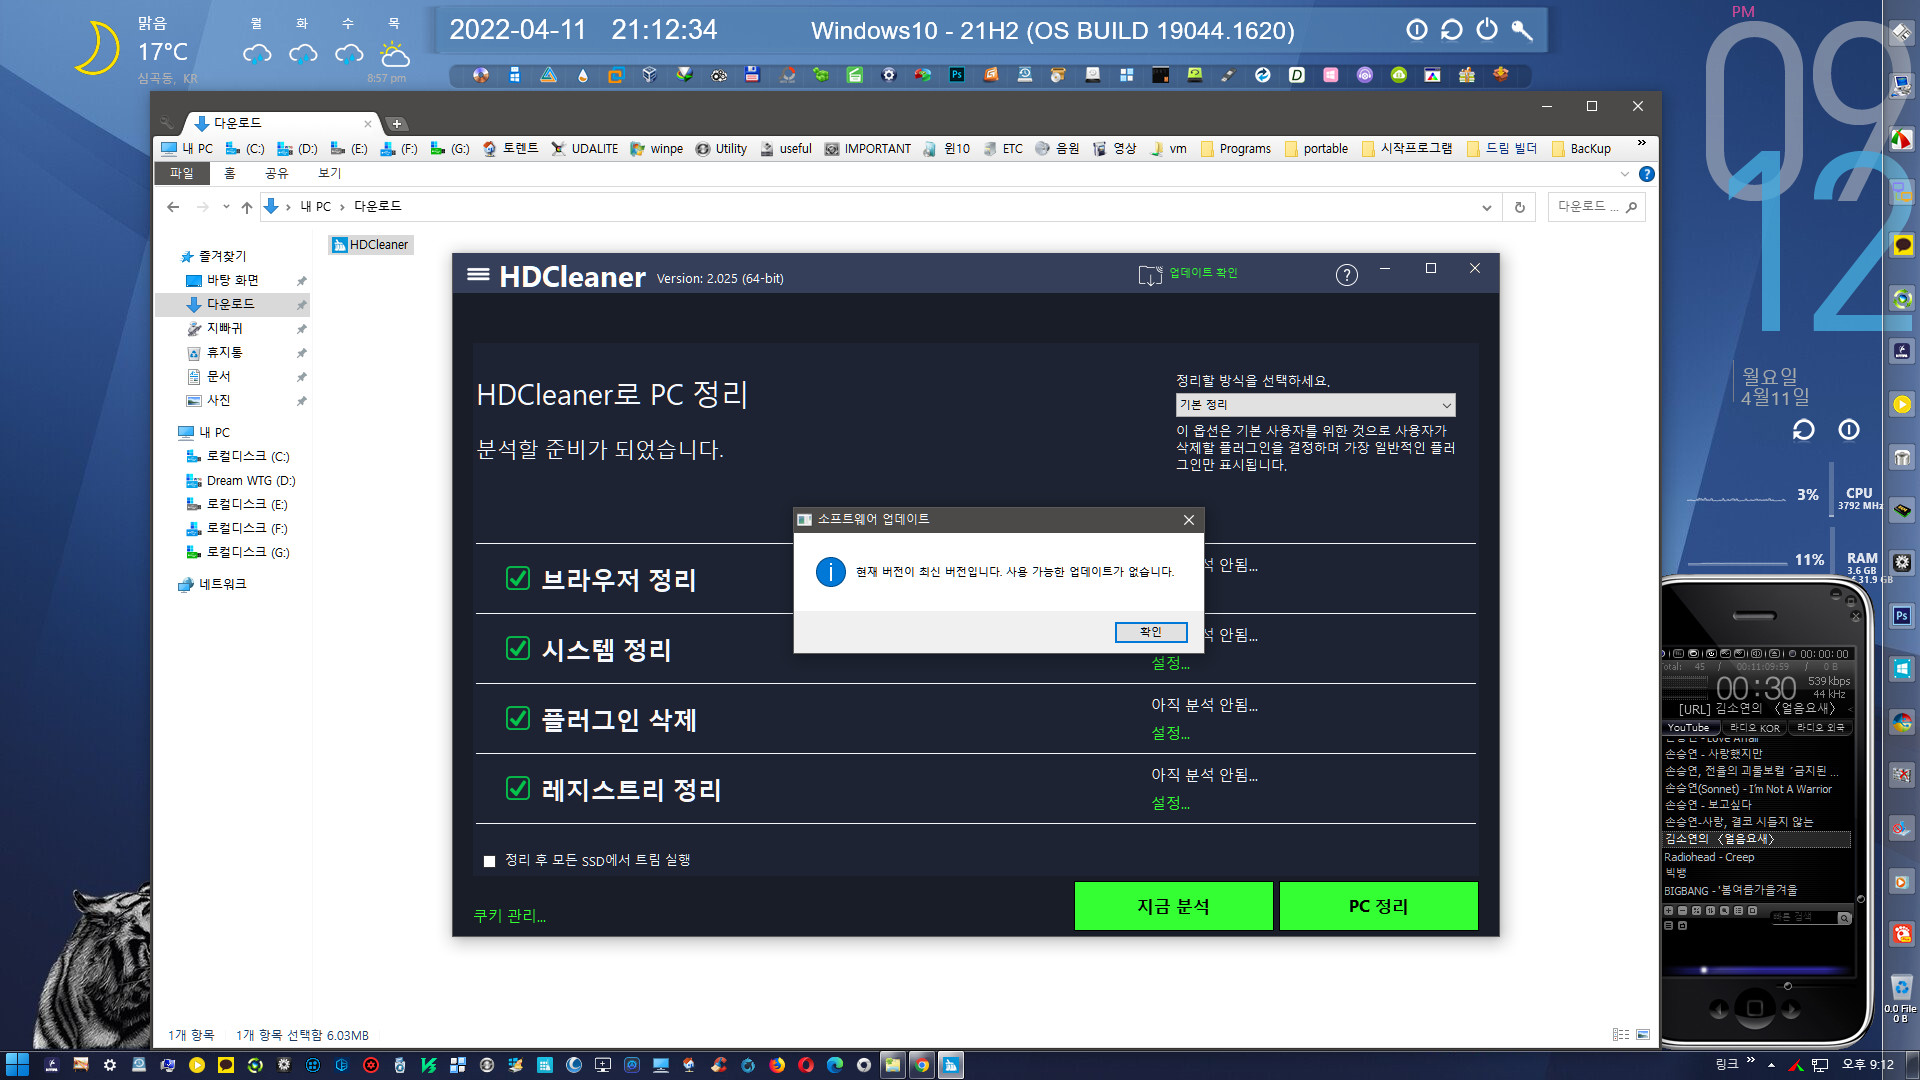 HDCleaner 2.057 download the last version for windows